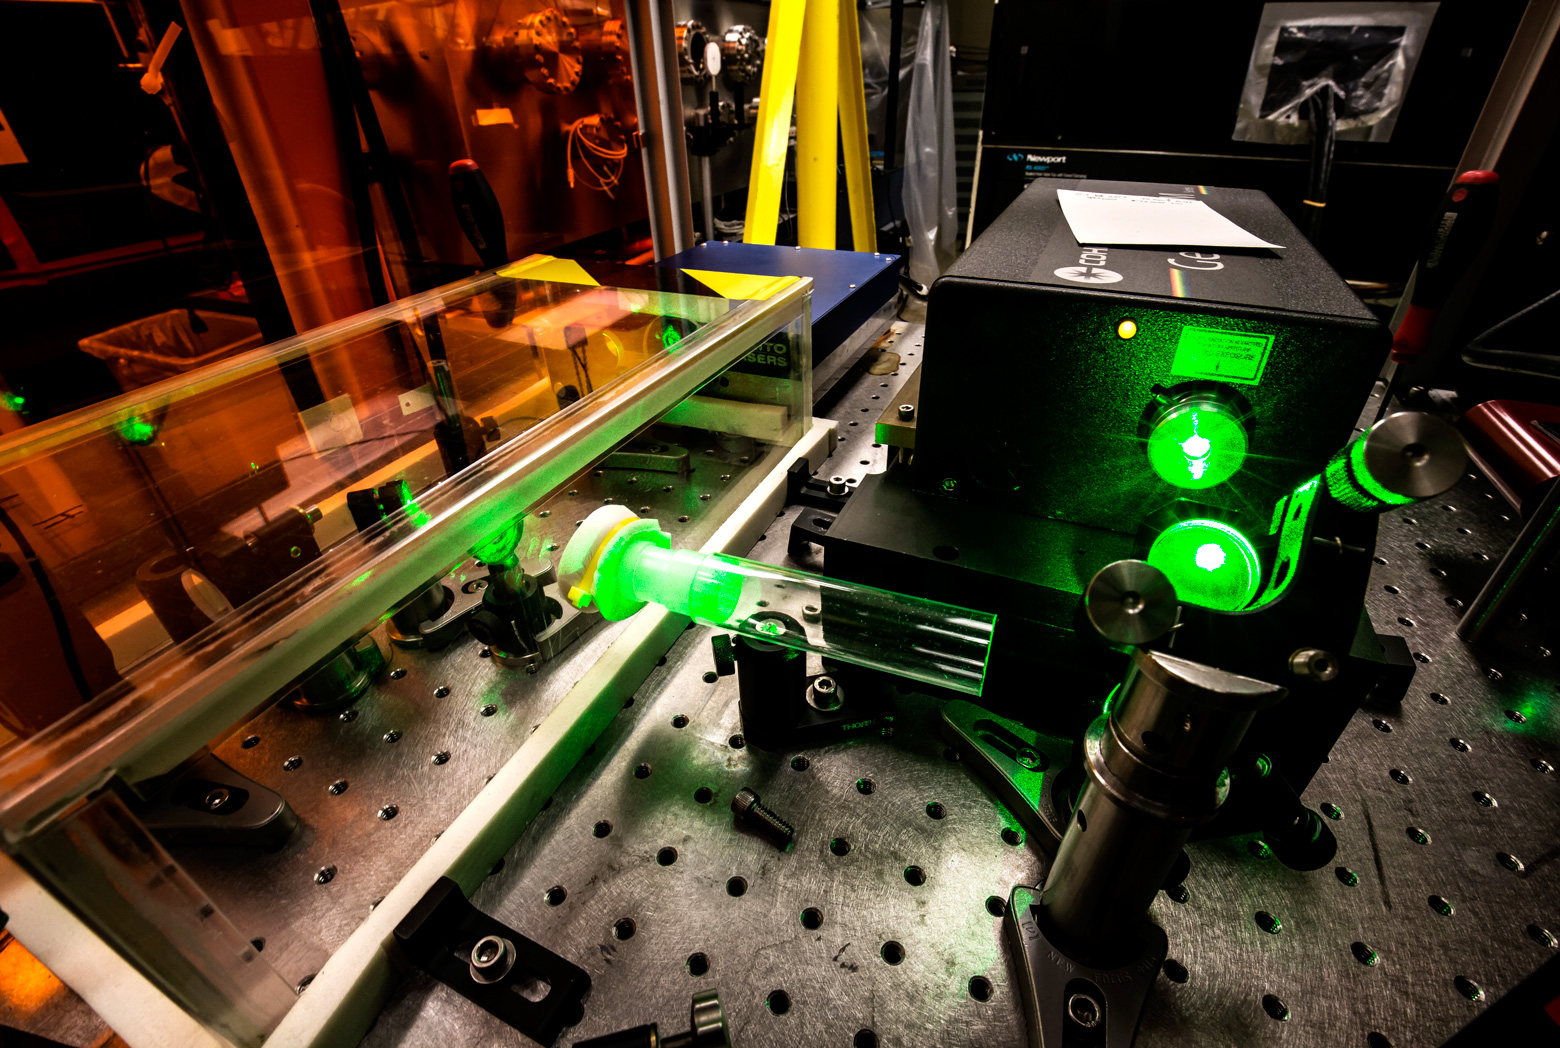 The HERCULES laser in the lab